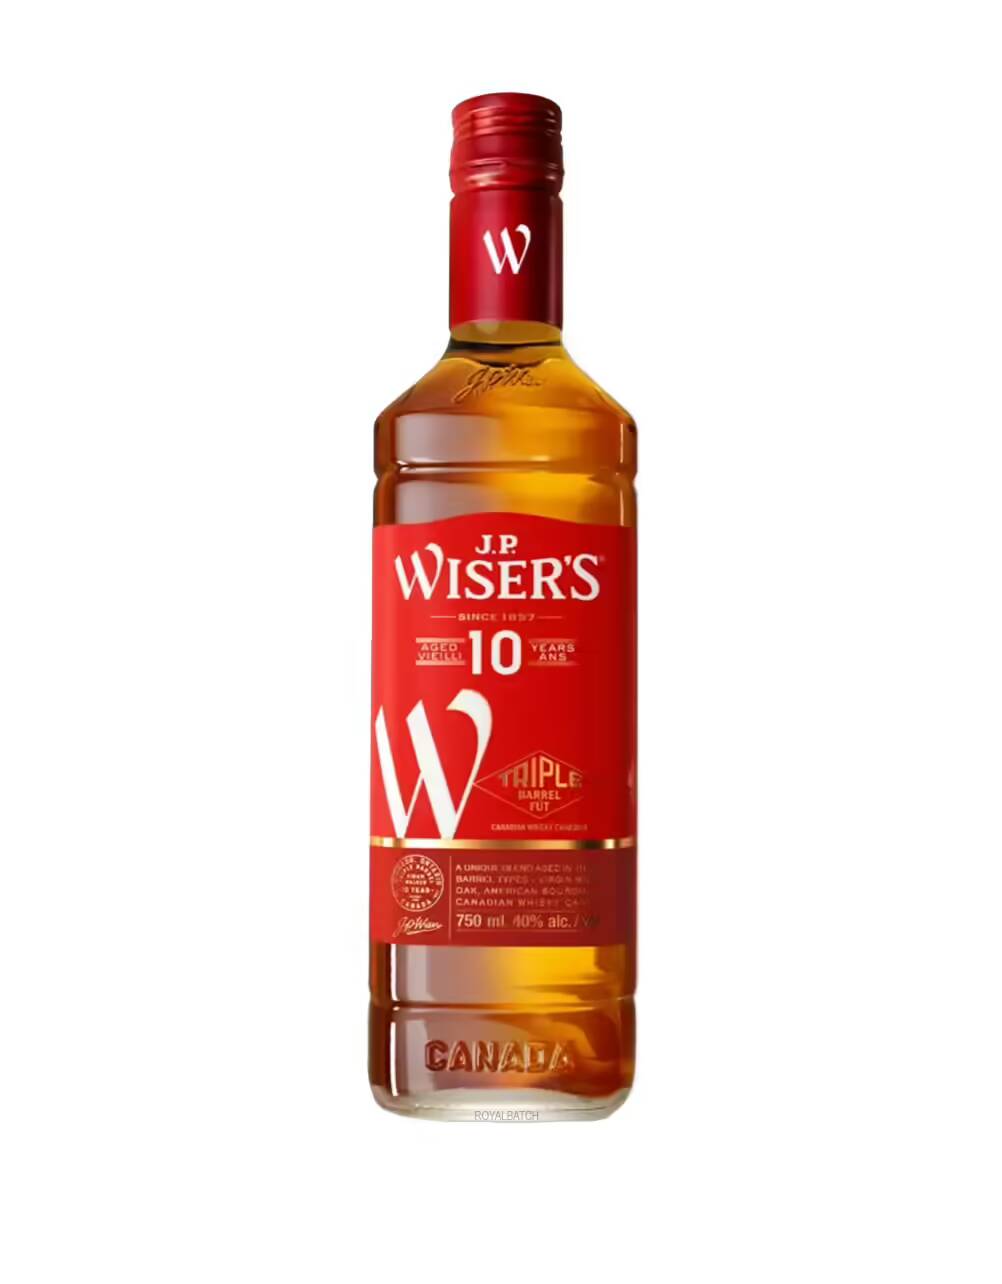 JP Wisers Triple Barrel 10 Year Old Canadian Whisky